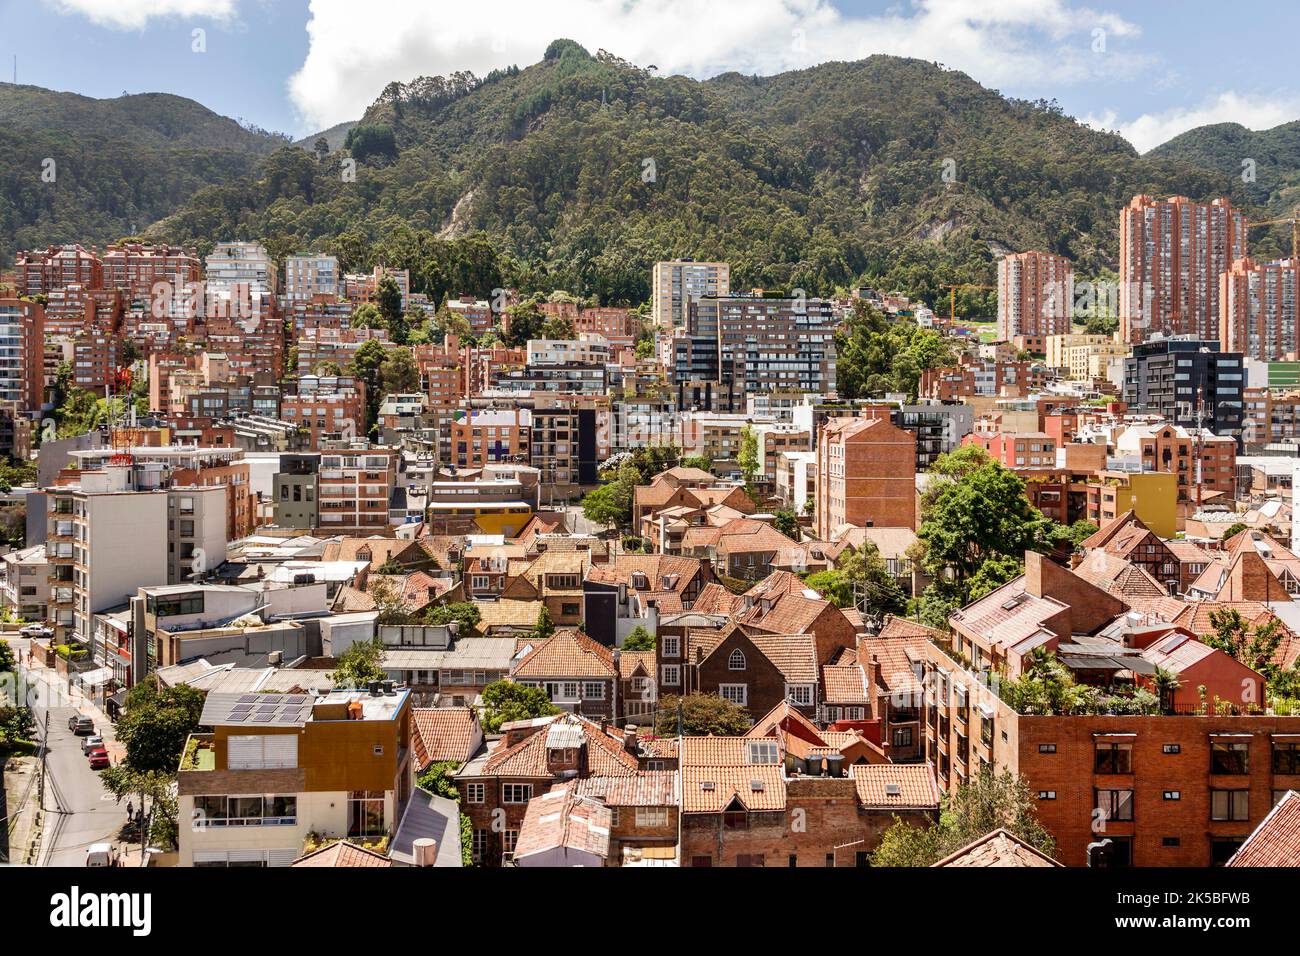 Bogota Colombia,Chapinero Norte,neighborhood panoramic city skyline urban aerial view high-rise residential apartment buildings houses Eastern Hills C Stock Photo